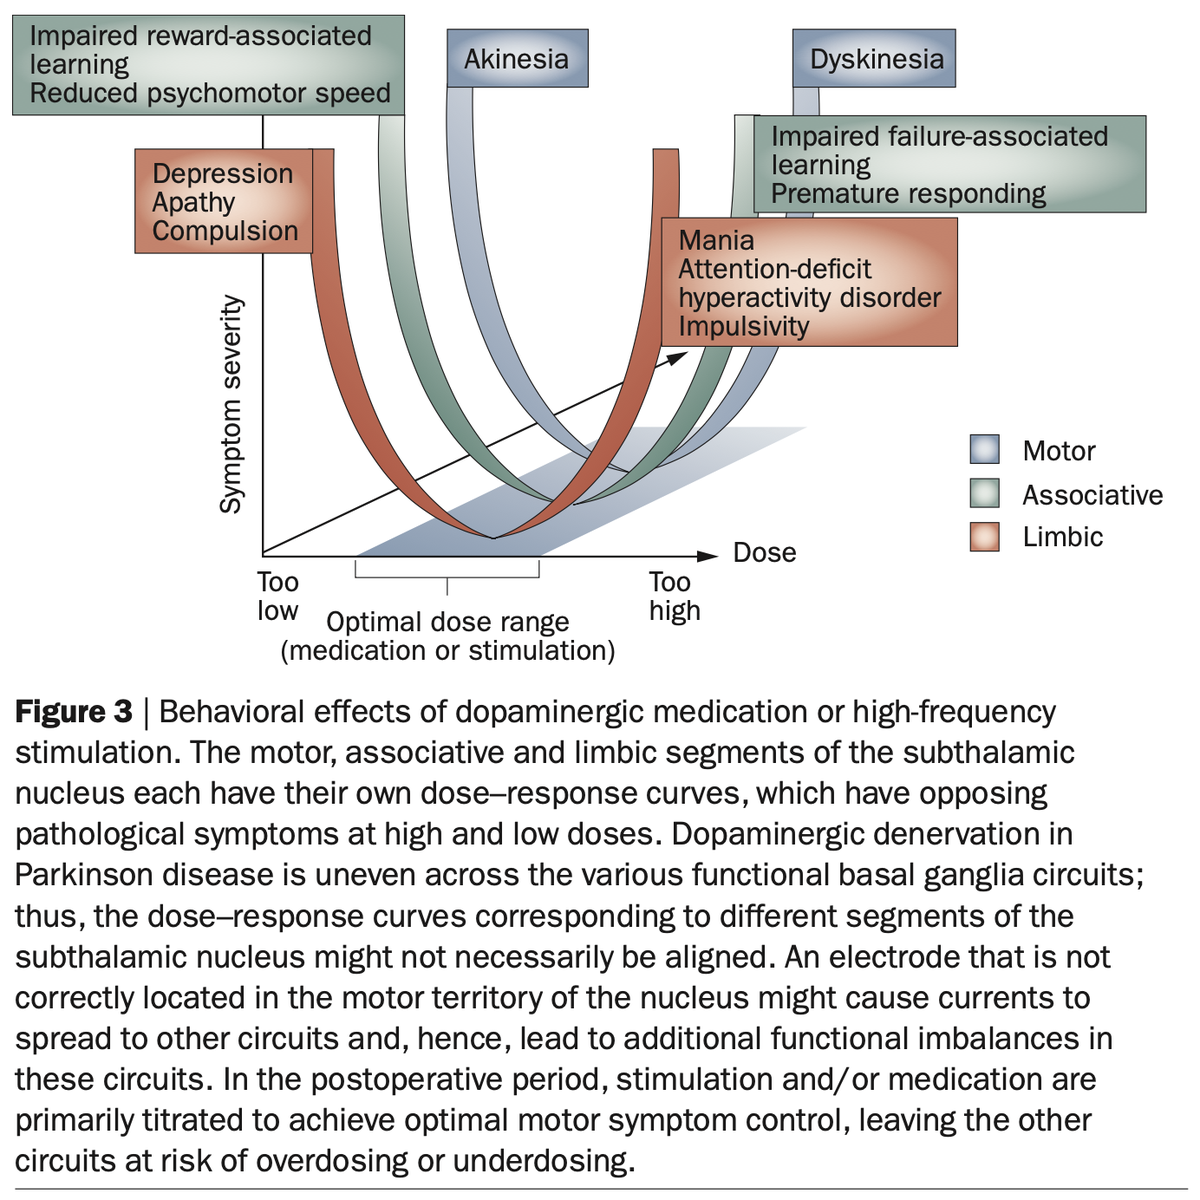 A review by Volkmann and colleagues in  @NatRevNeurol expands on this by contrasting motor symptoms in PD to nonmotor symptoms involved in other basal ganglia disorders. Hence, hypomania as a side-effect of STN-DBS has a good pathophysiological model.  http://doi.org/10.1038/nrneurol.2010.111